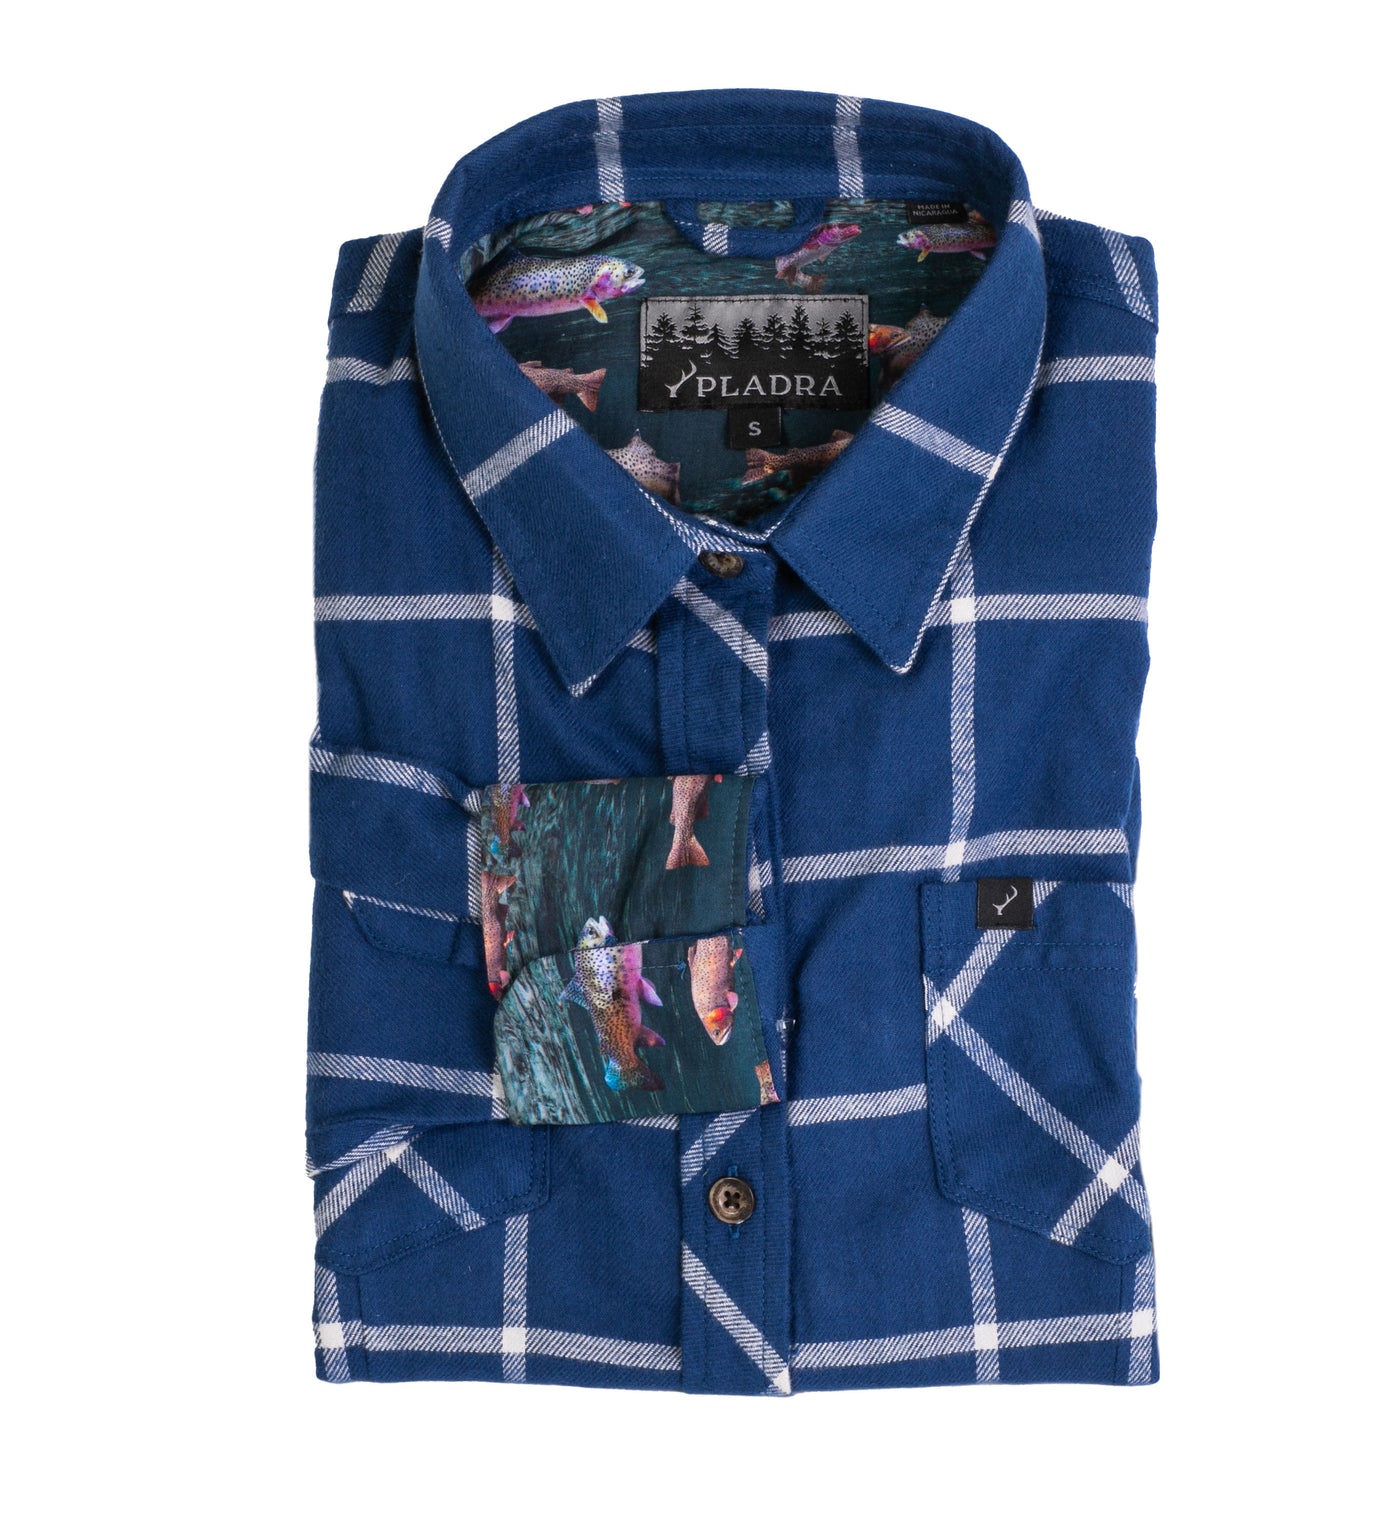 Women's Peregrine Every Day Flannel Shirt- Billings Blue